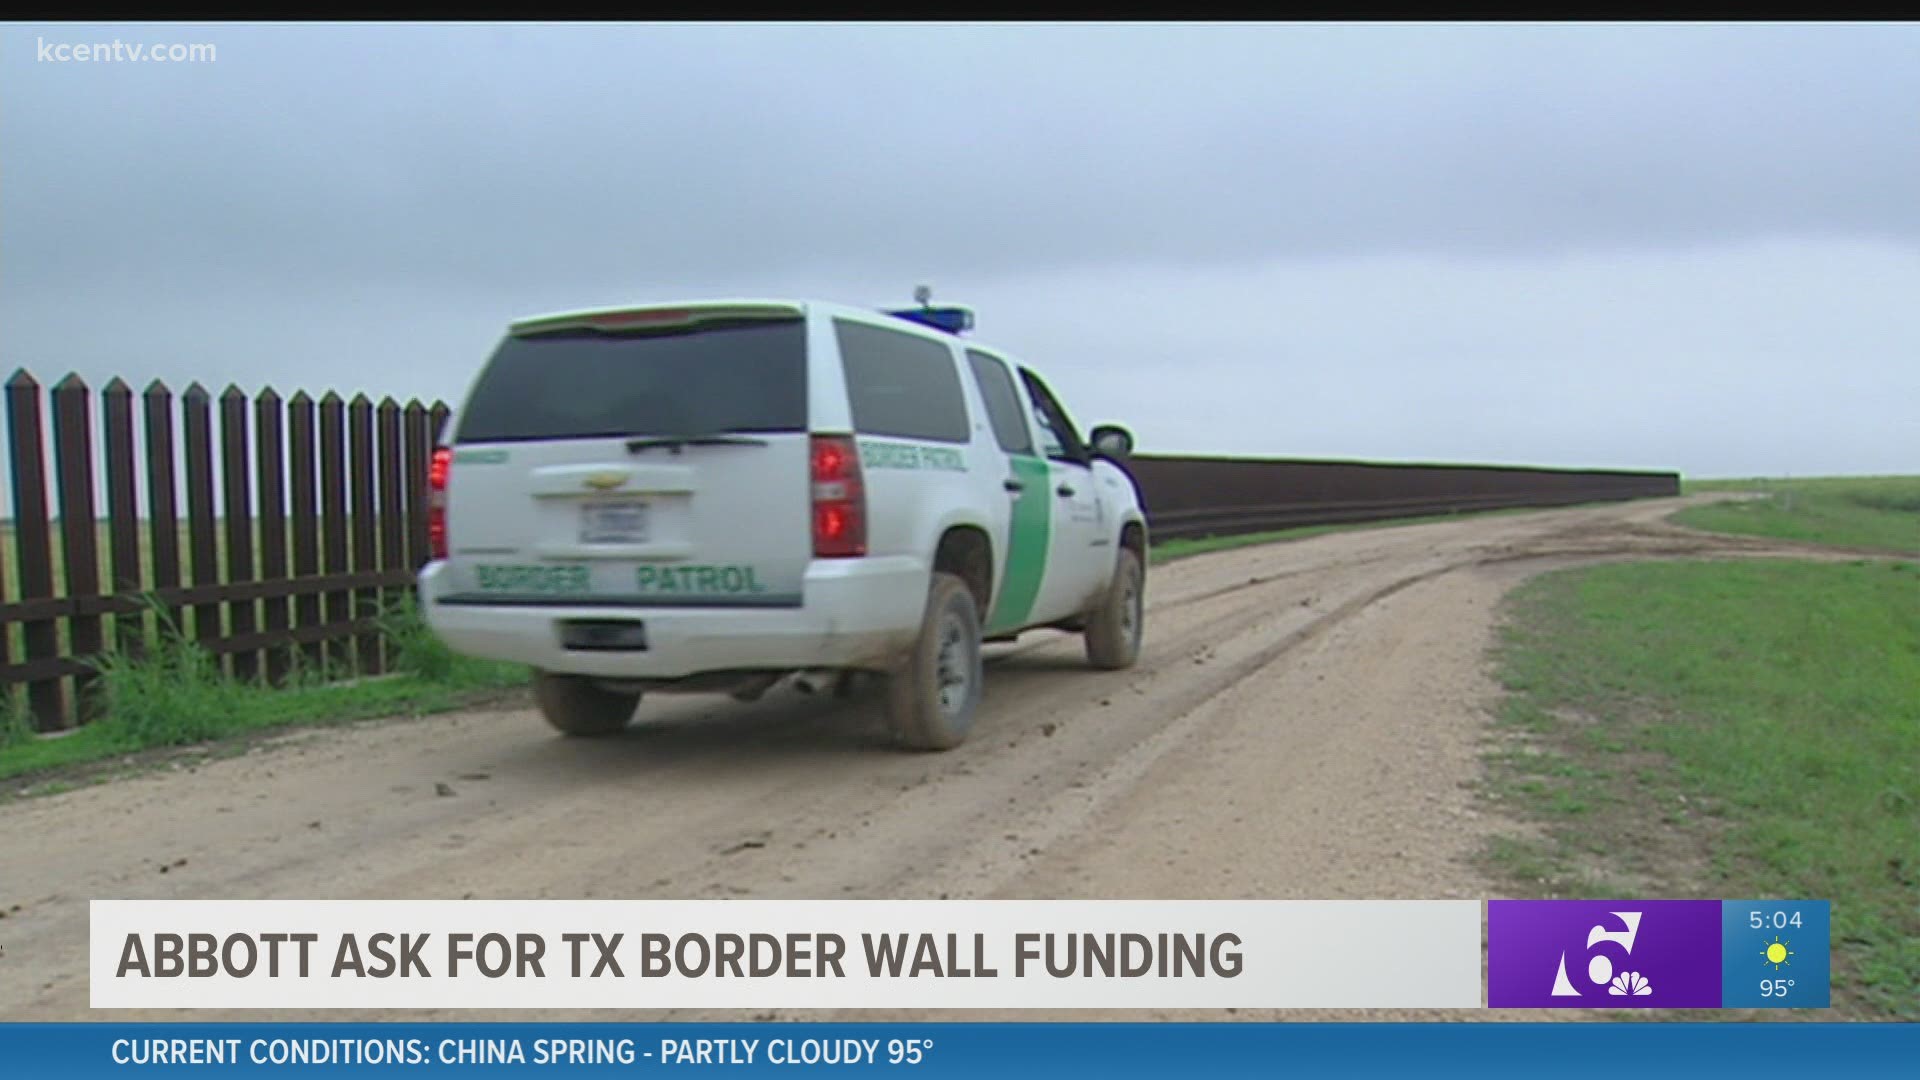 Abbott plans to have Texas build its own wall at the Texas-Mexico border after President Biden redirected funds originally diverted by President Trump for the wall.